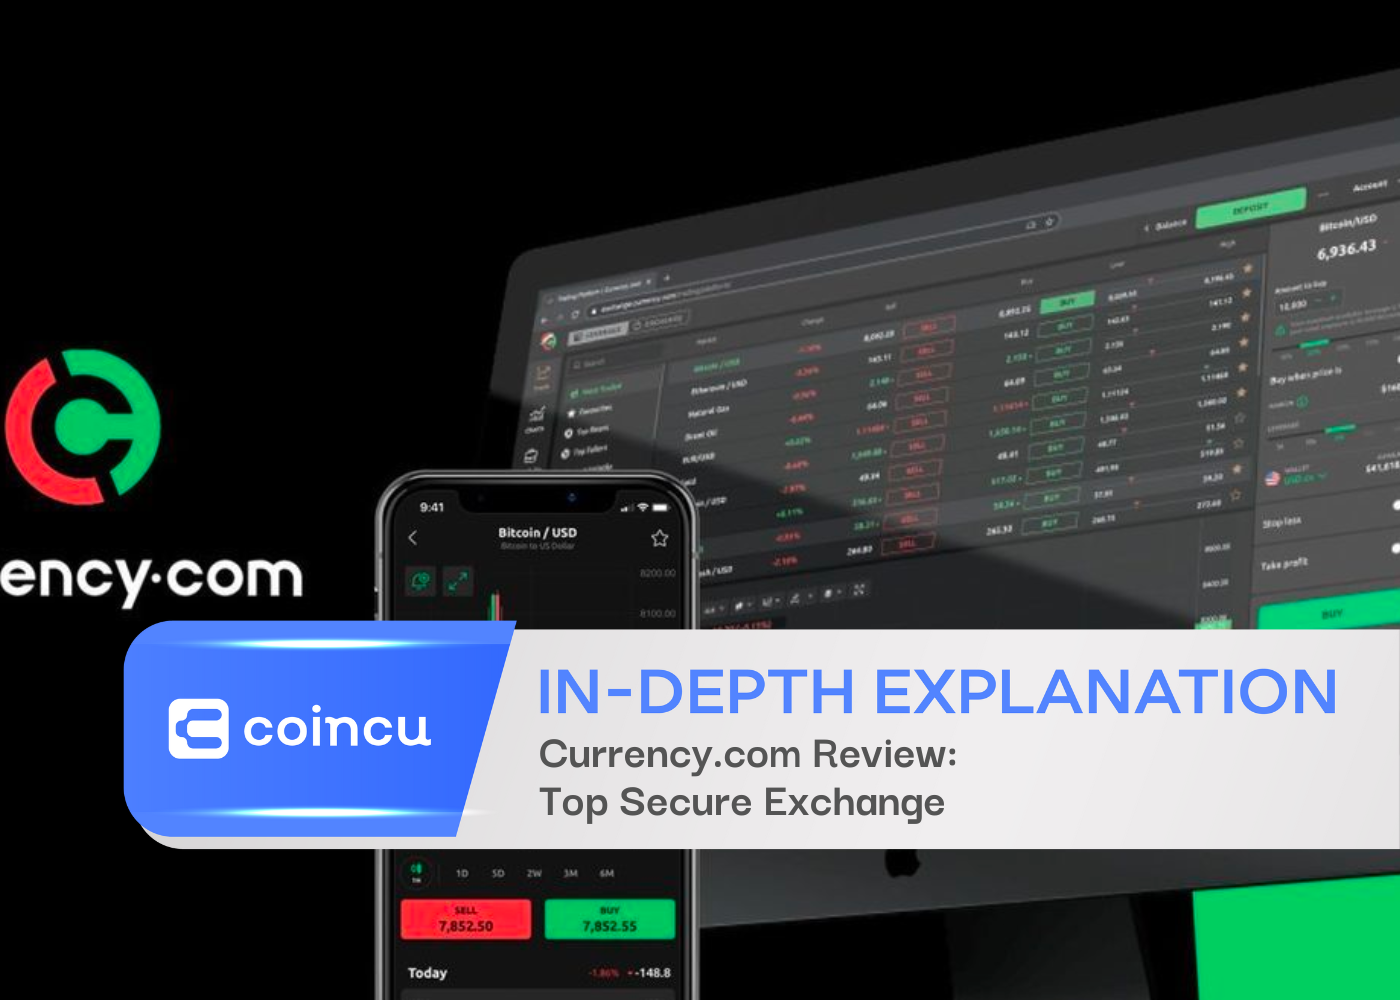 Currency.com Review: Top Secure Exchange